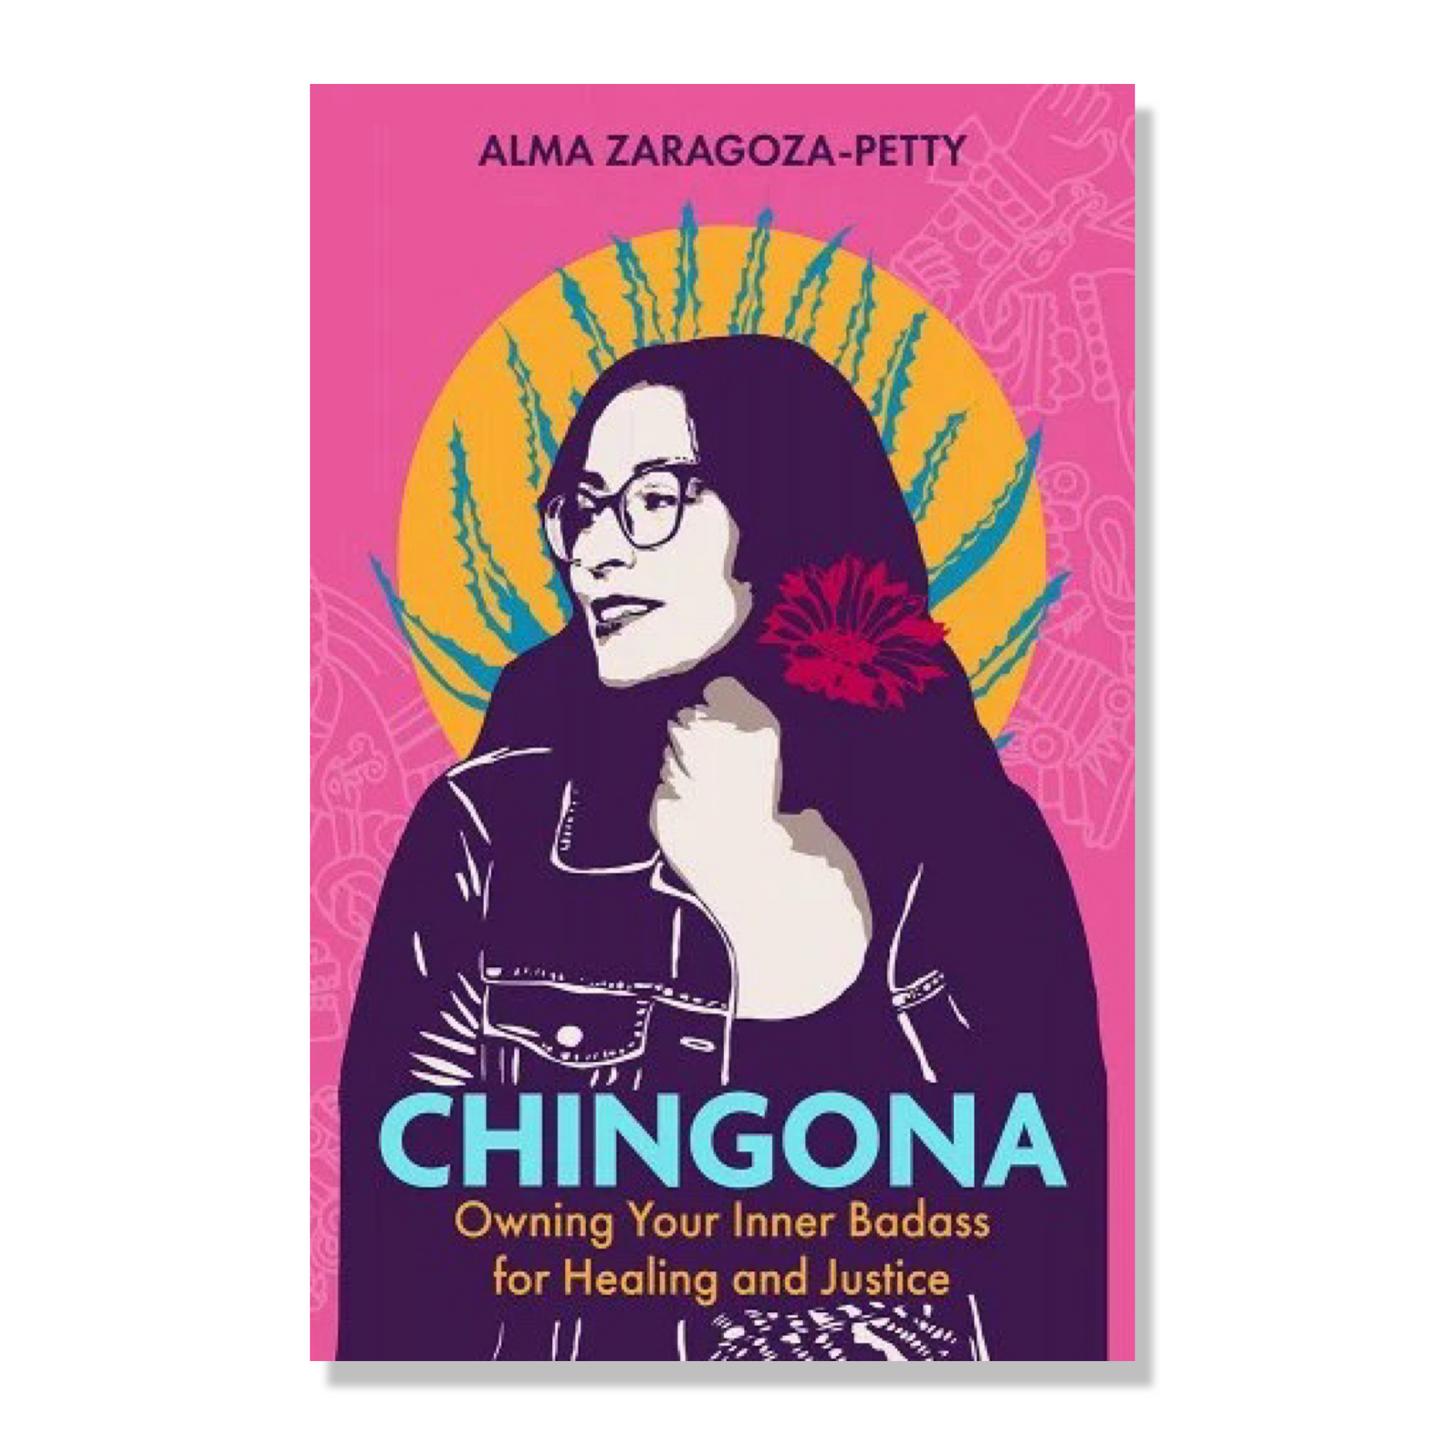 Chingona: Owning Your Inner Badass for Healing and Justice